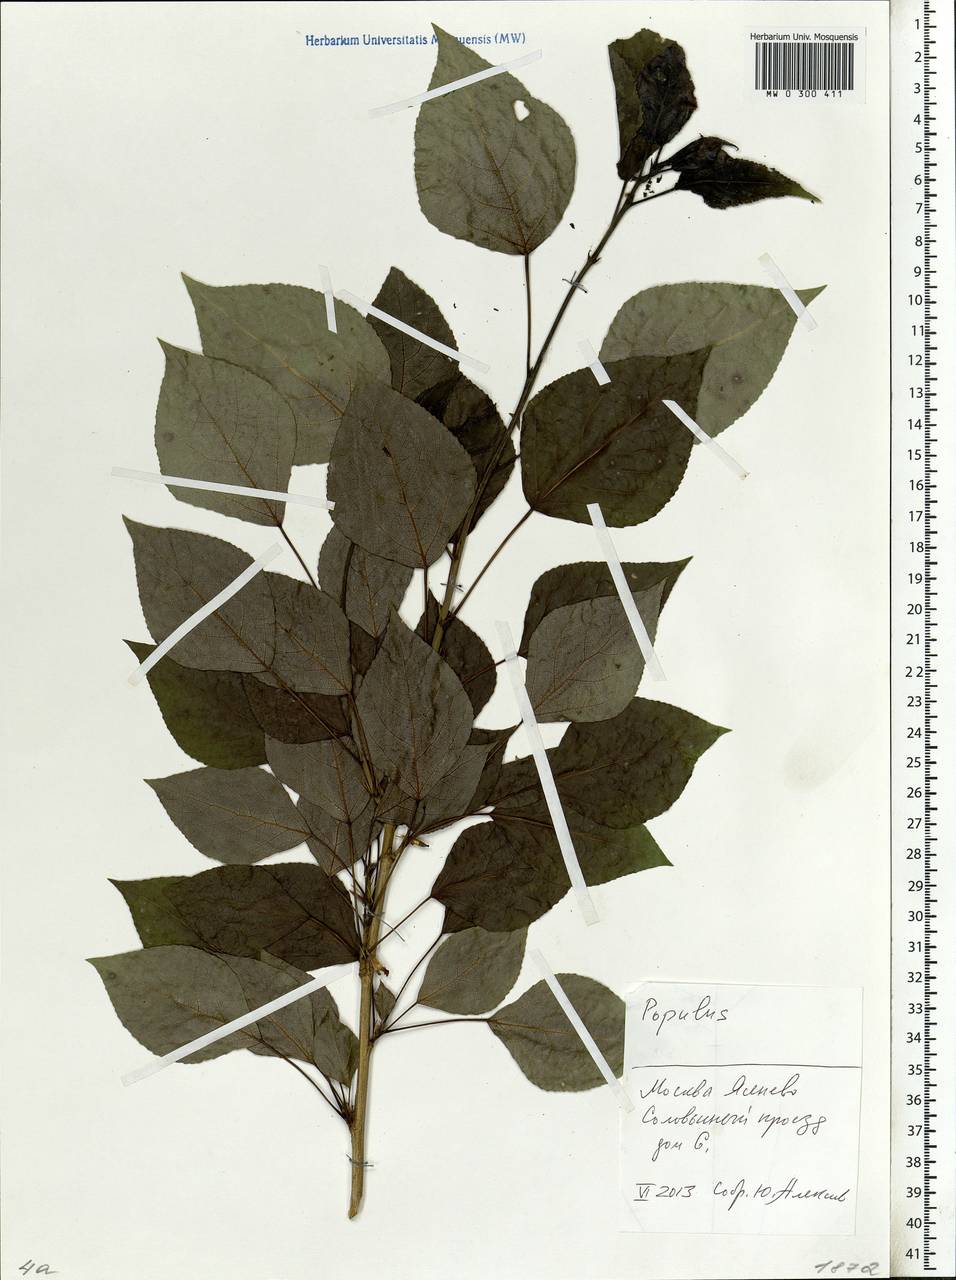 Populus, Eastern Europe, Moscow region (E4a) (Russia)